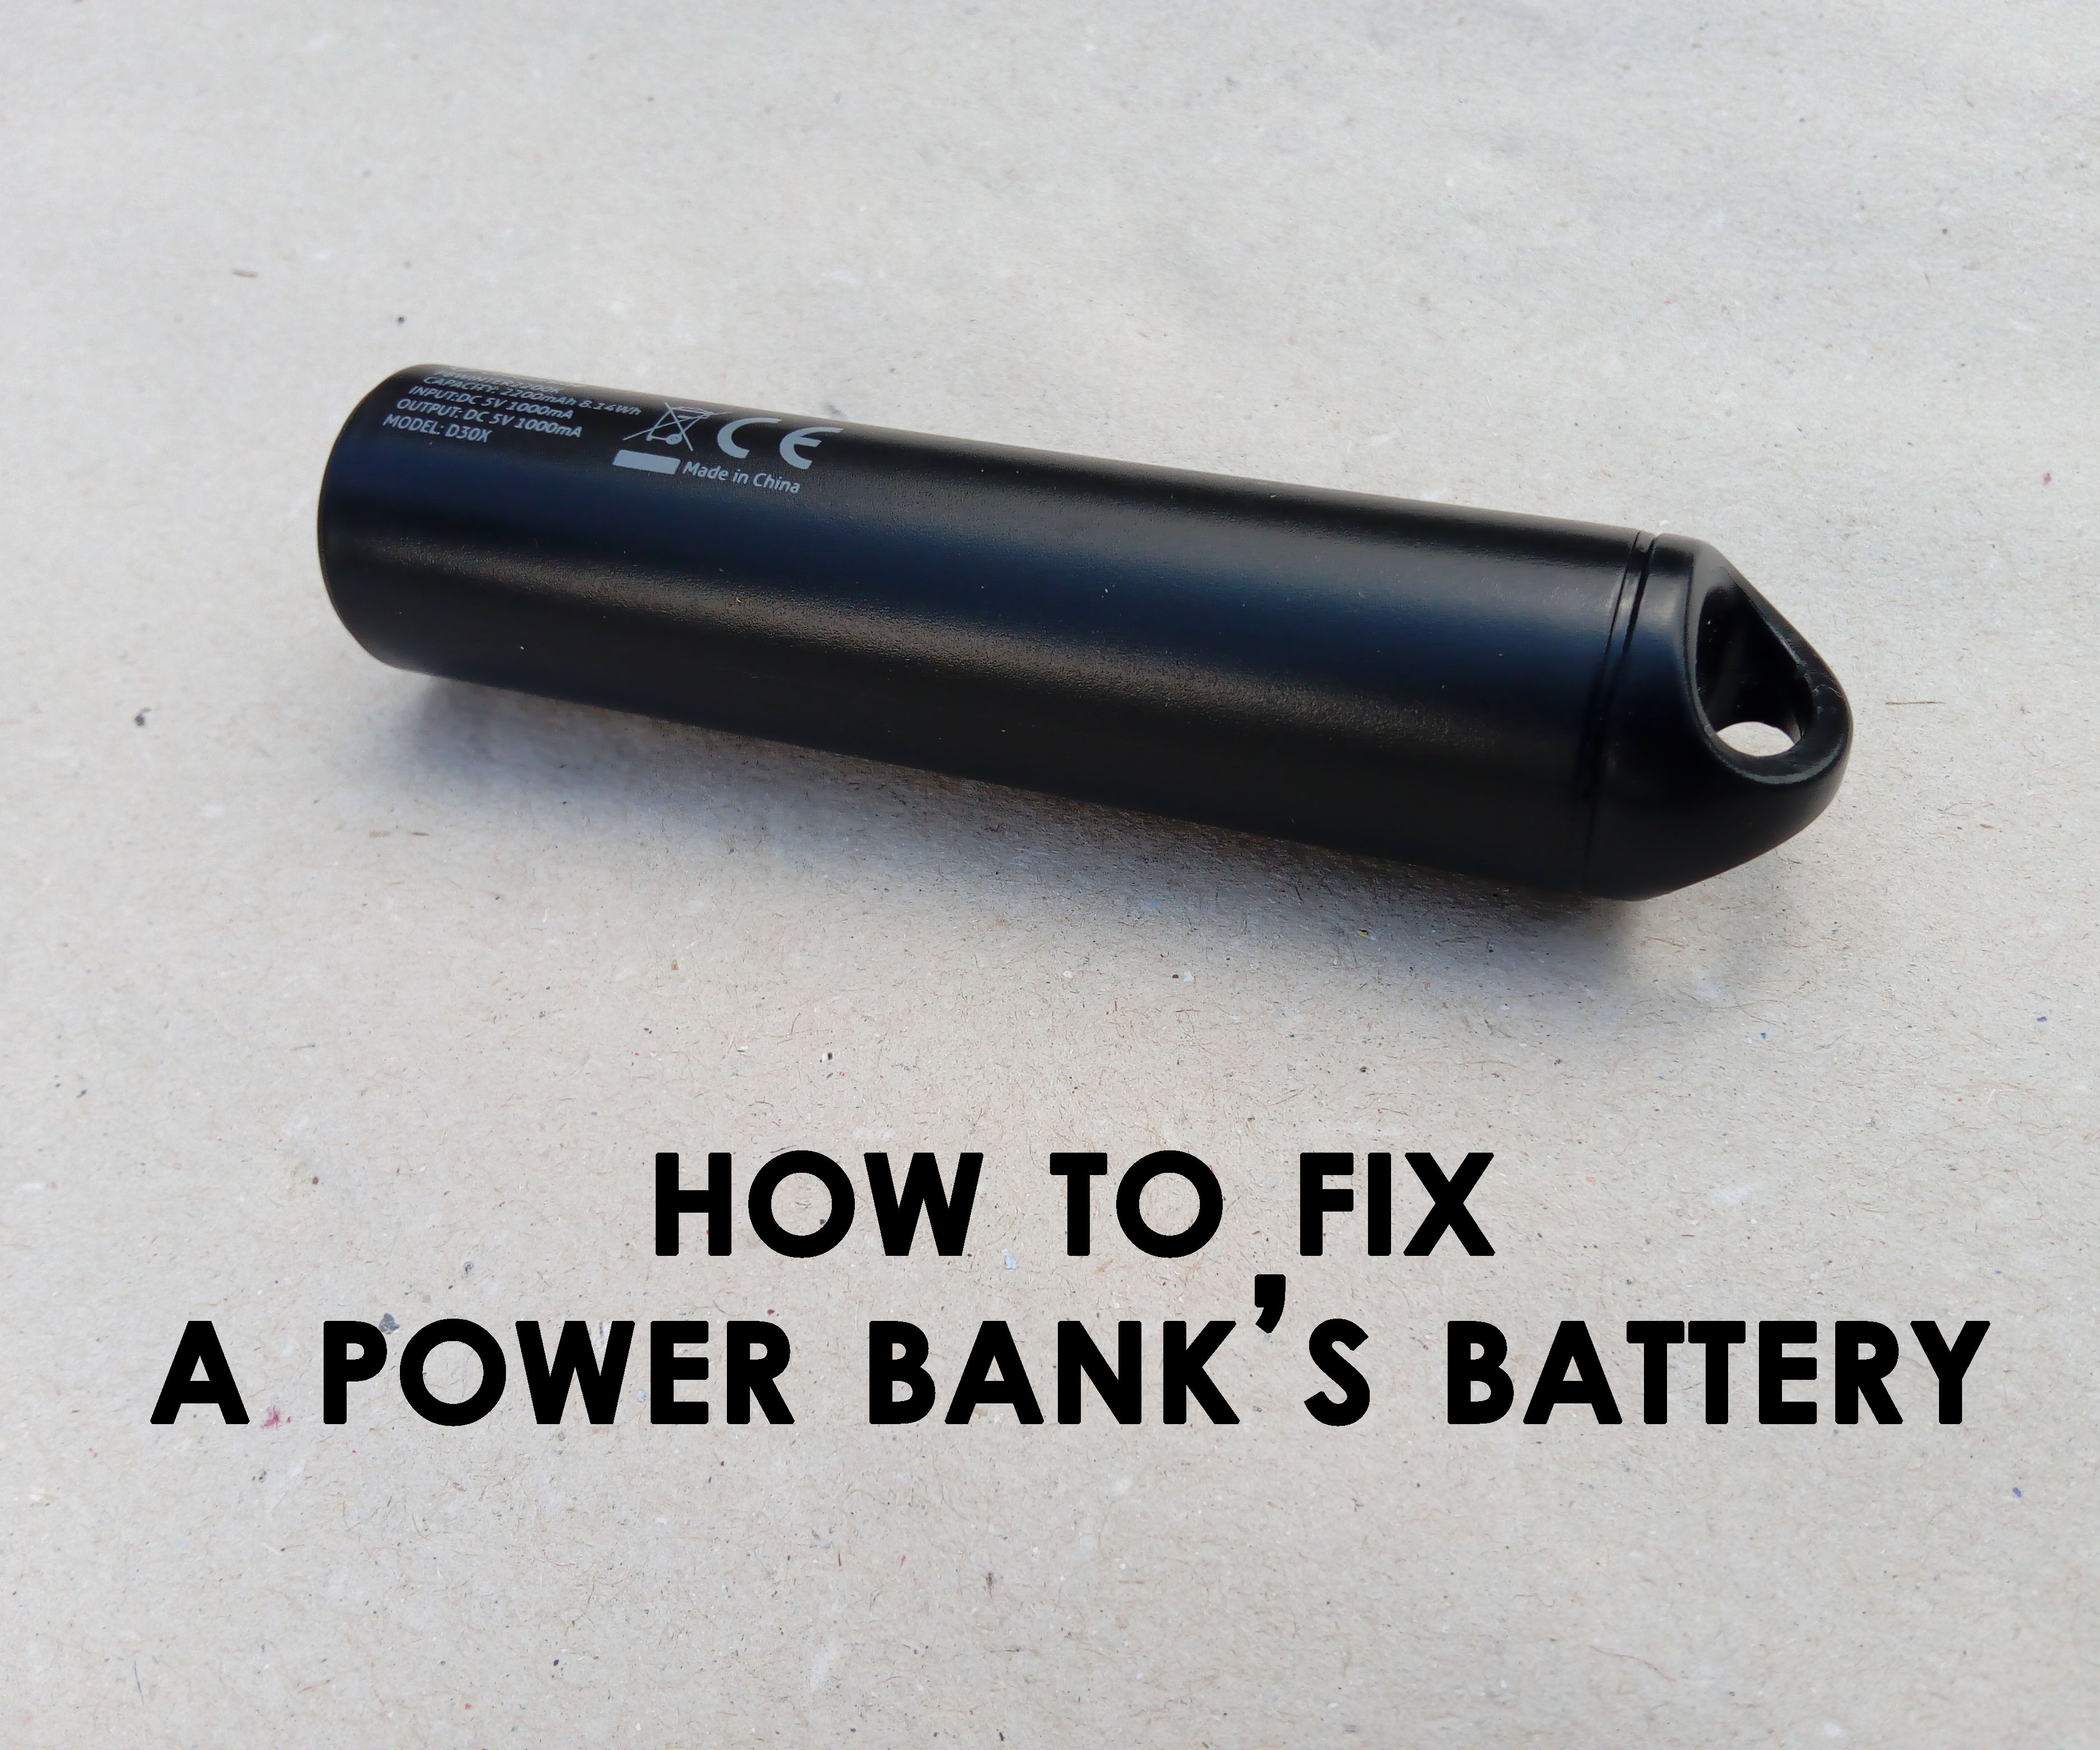 How to Fix a Power Bank's Battery